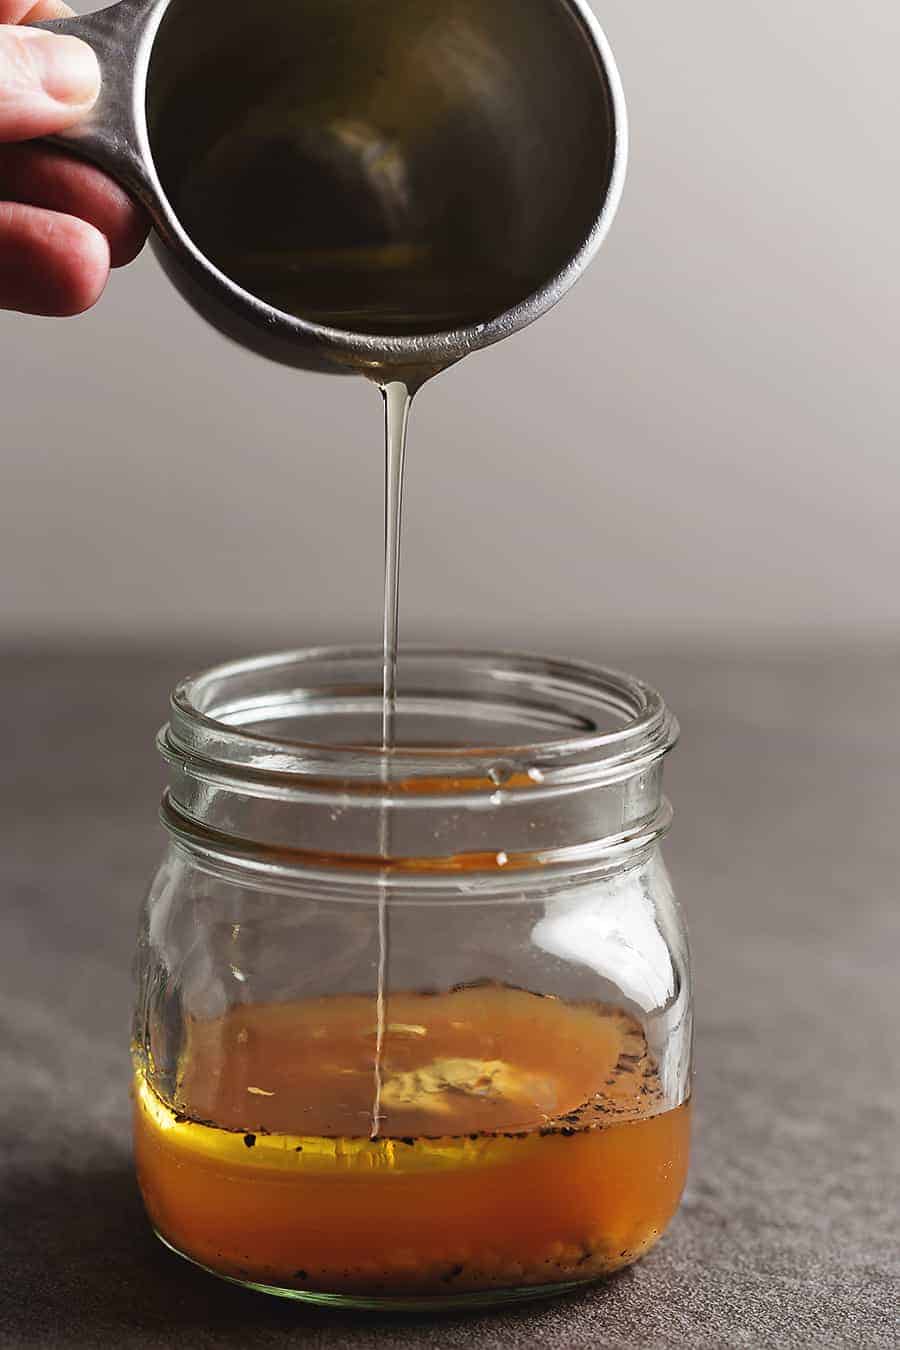 oil being poured into a jar to make dressing